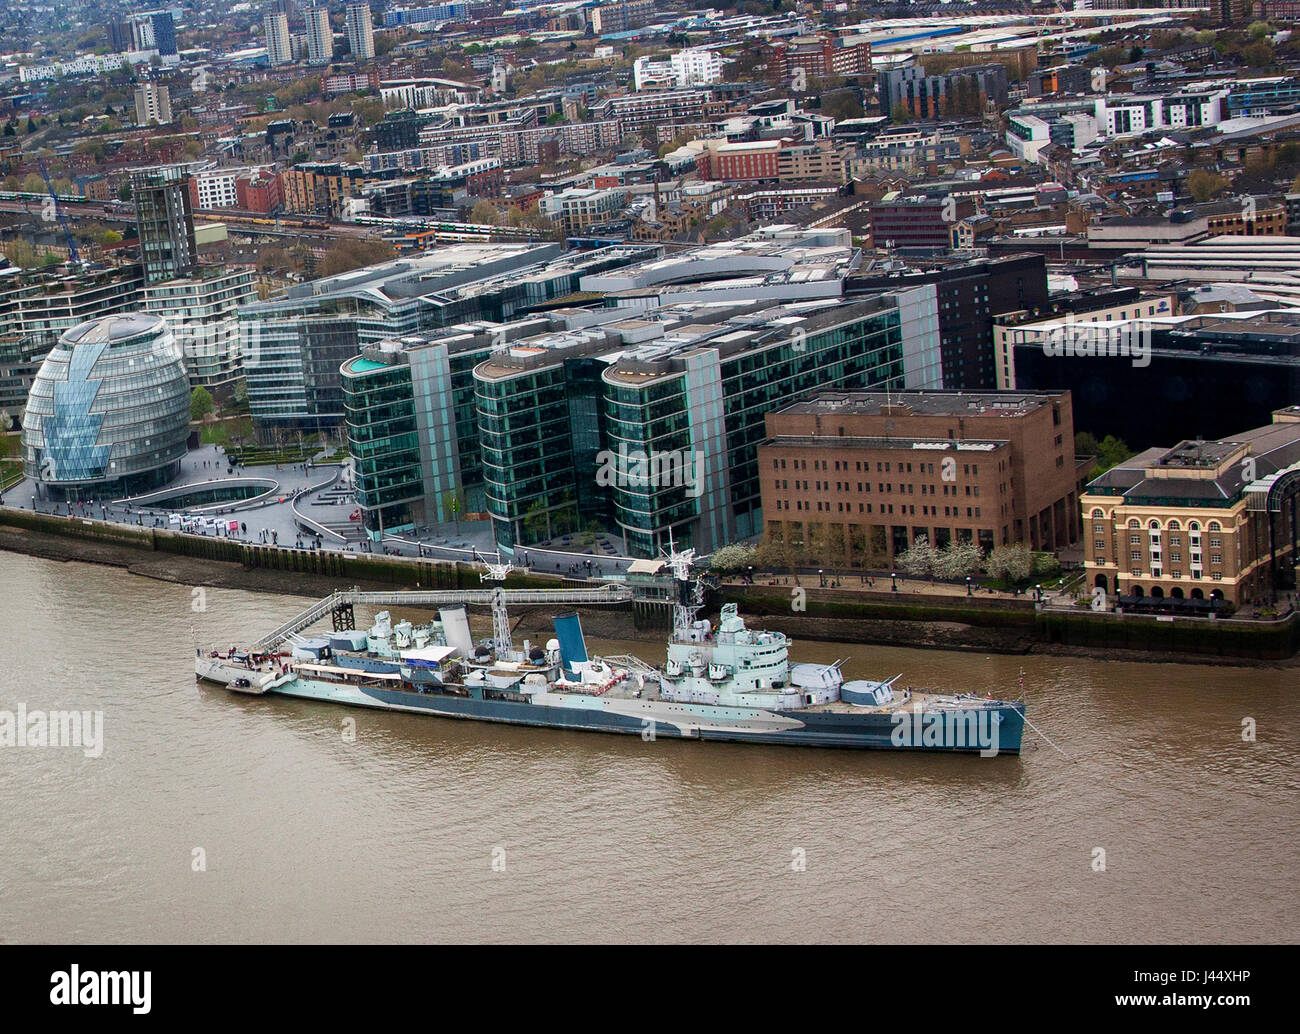 ariel view of HMS Belfast and the riverThames Stock Photo